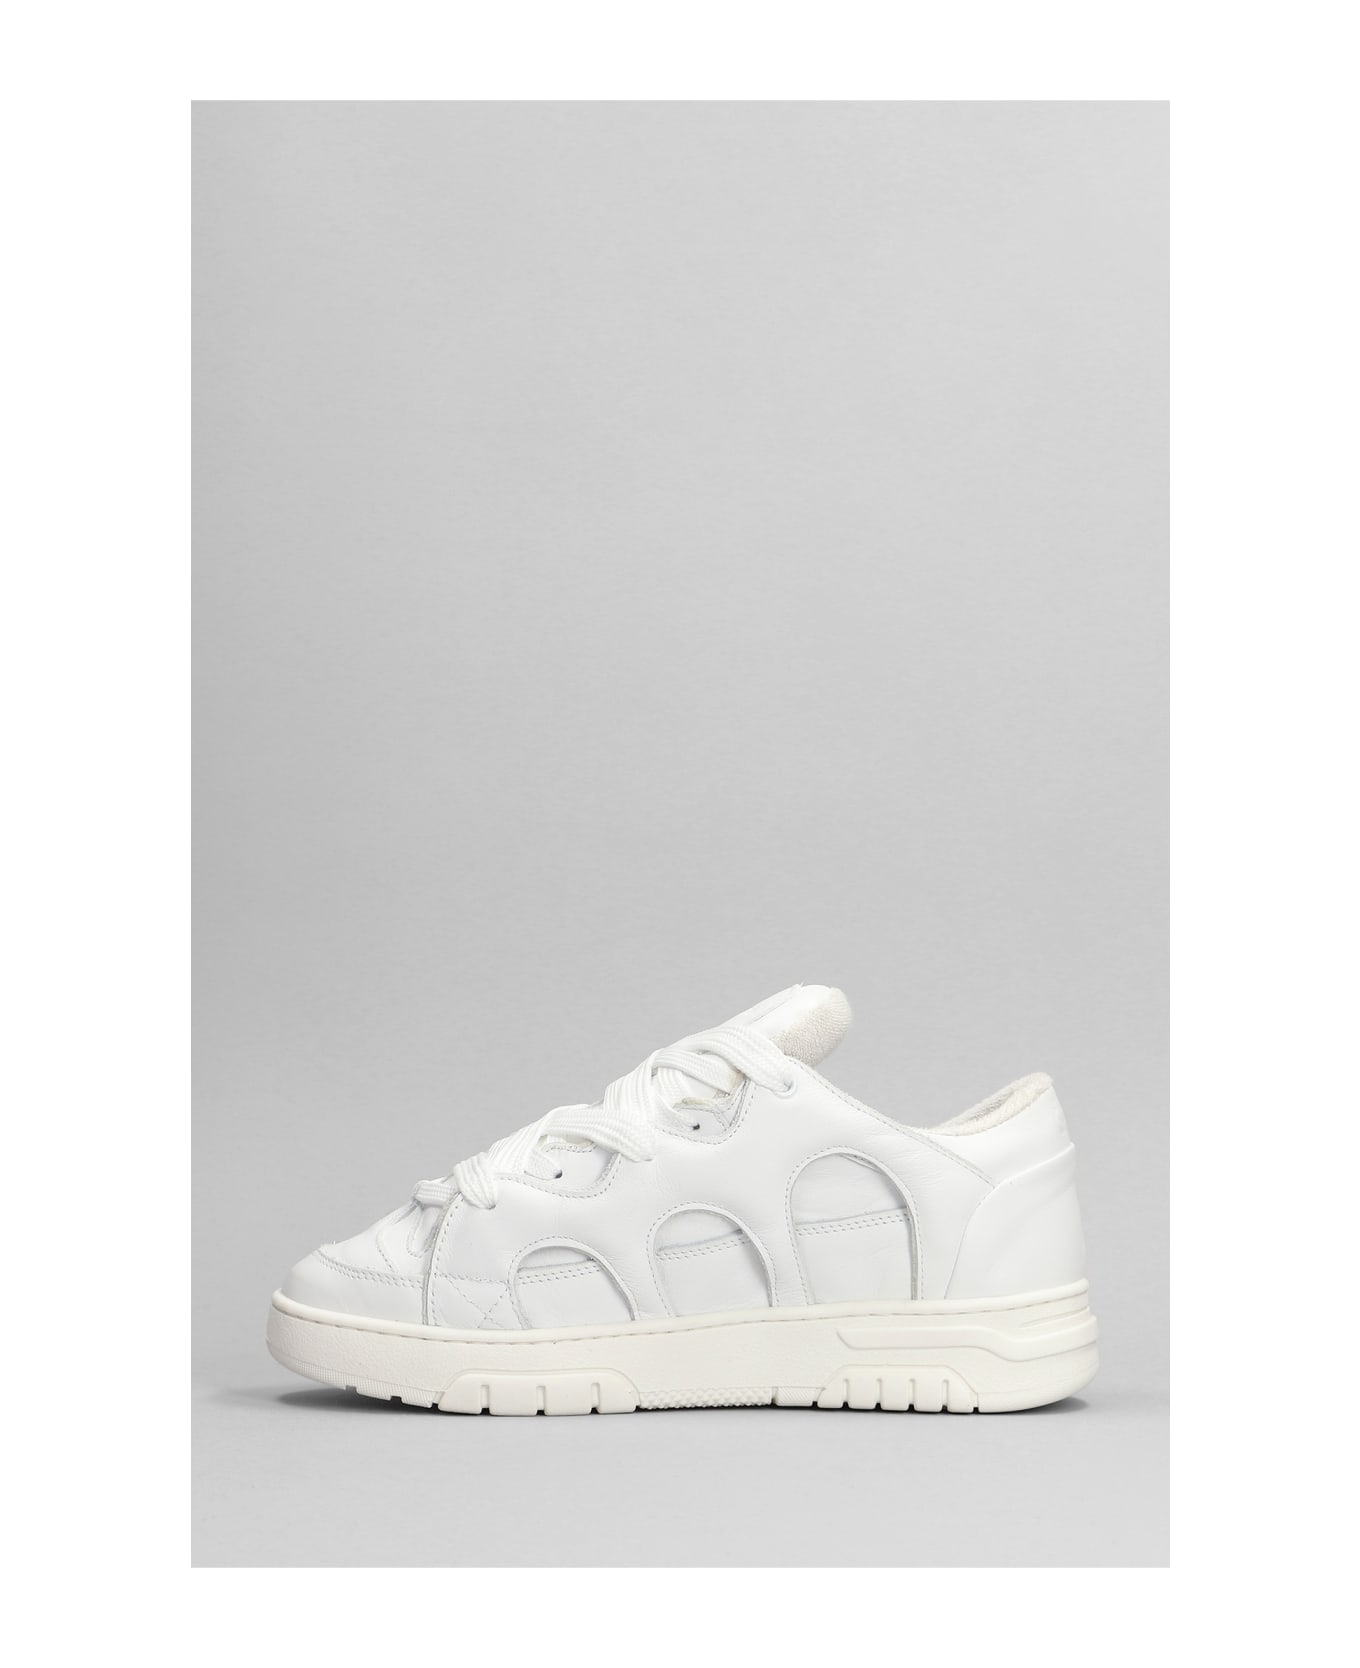 Paura Santha 1 Sneakers In White Leather - white